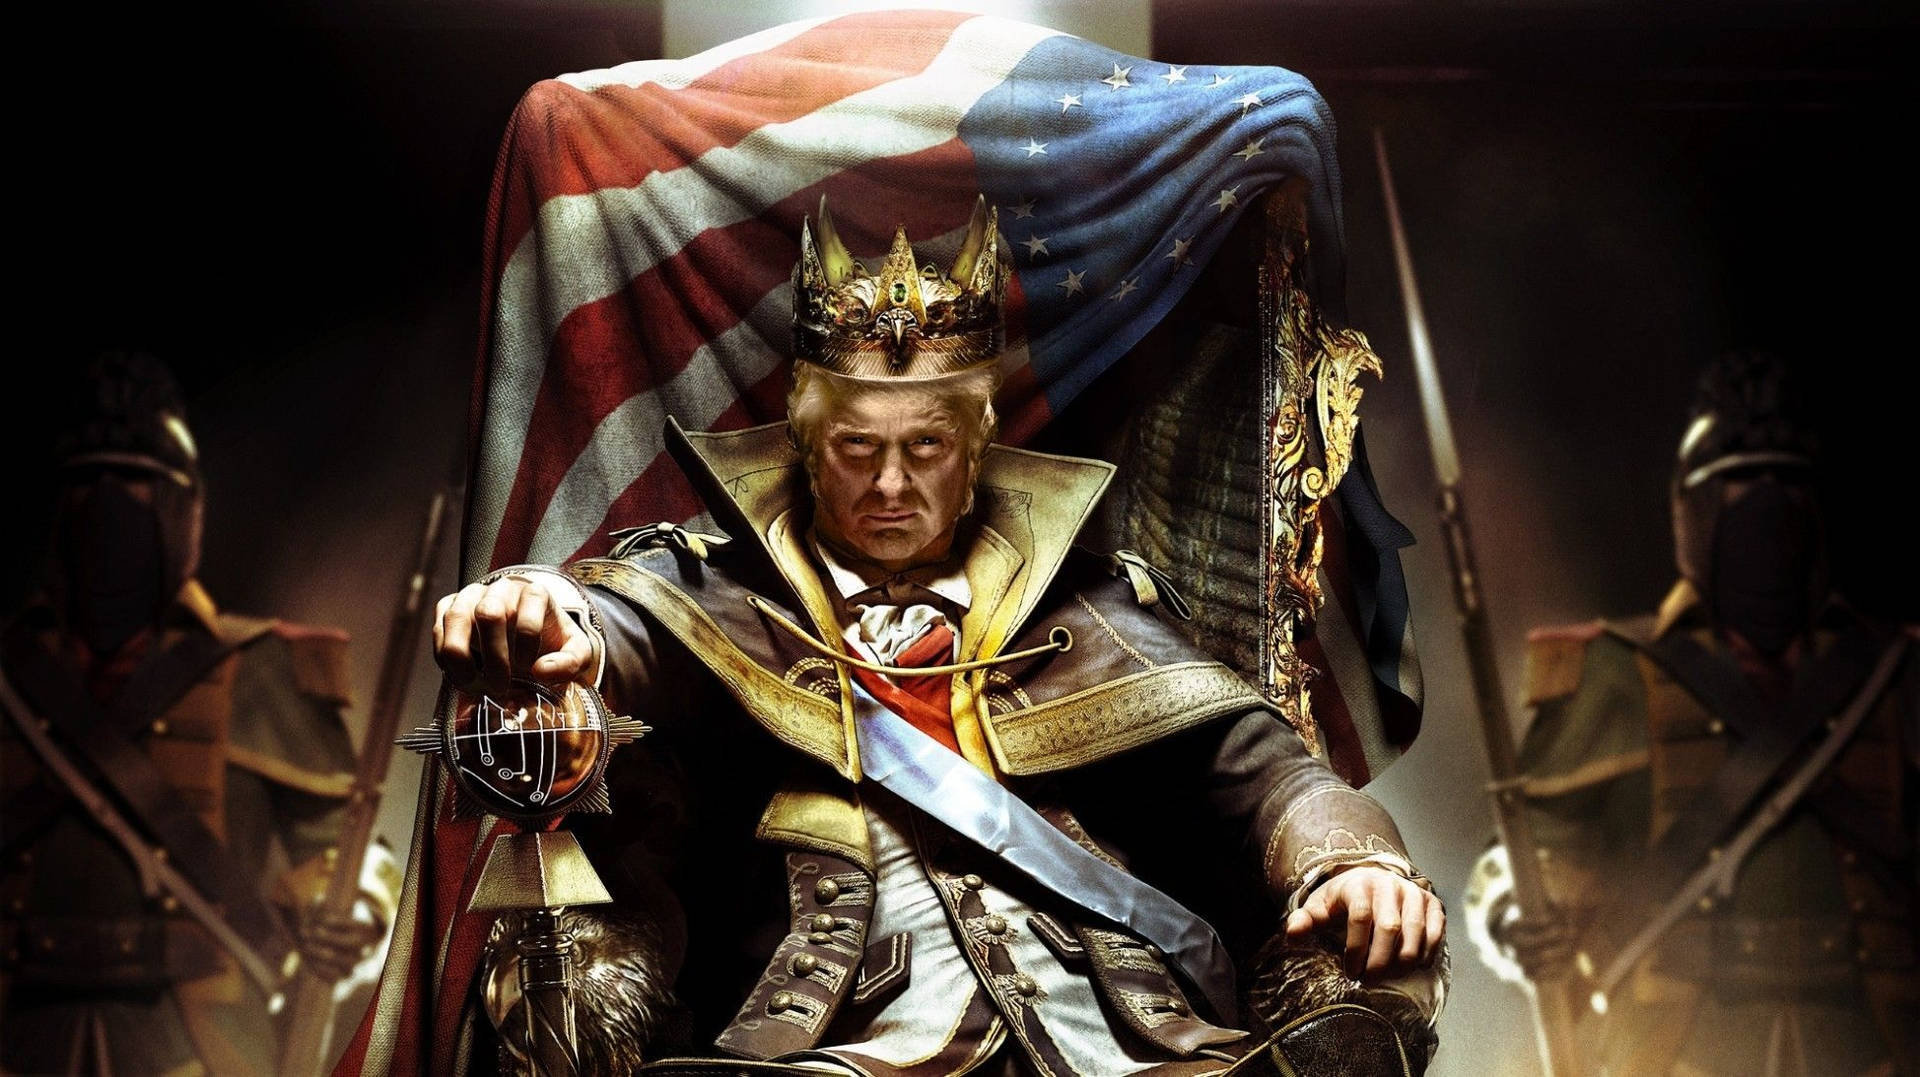 "United States of America: President Donald J. Trump sits on his throne of executive power" Wallpaper